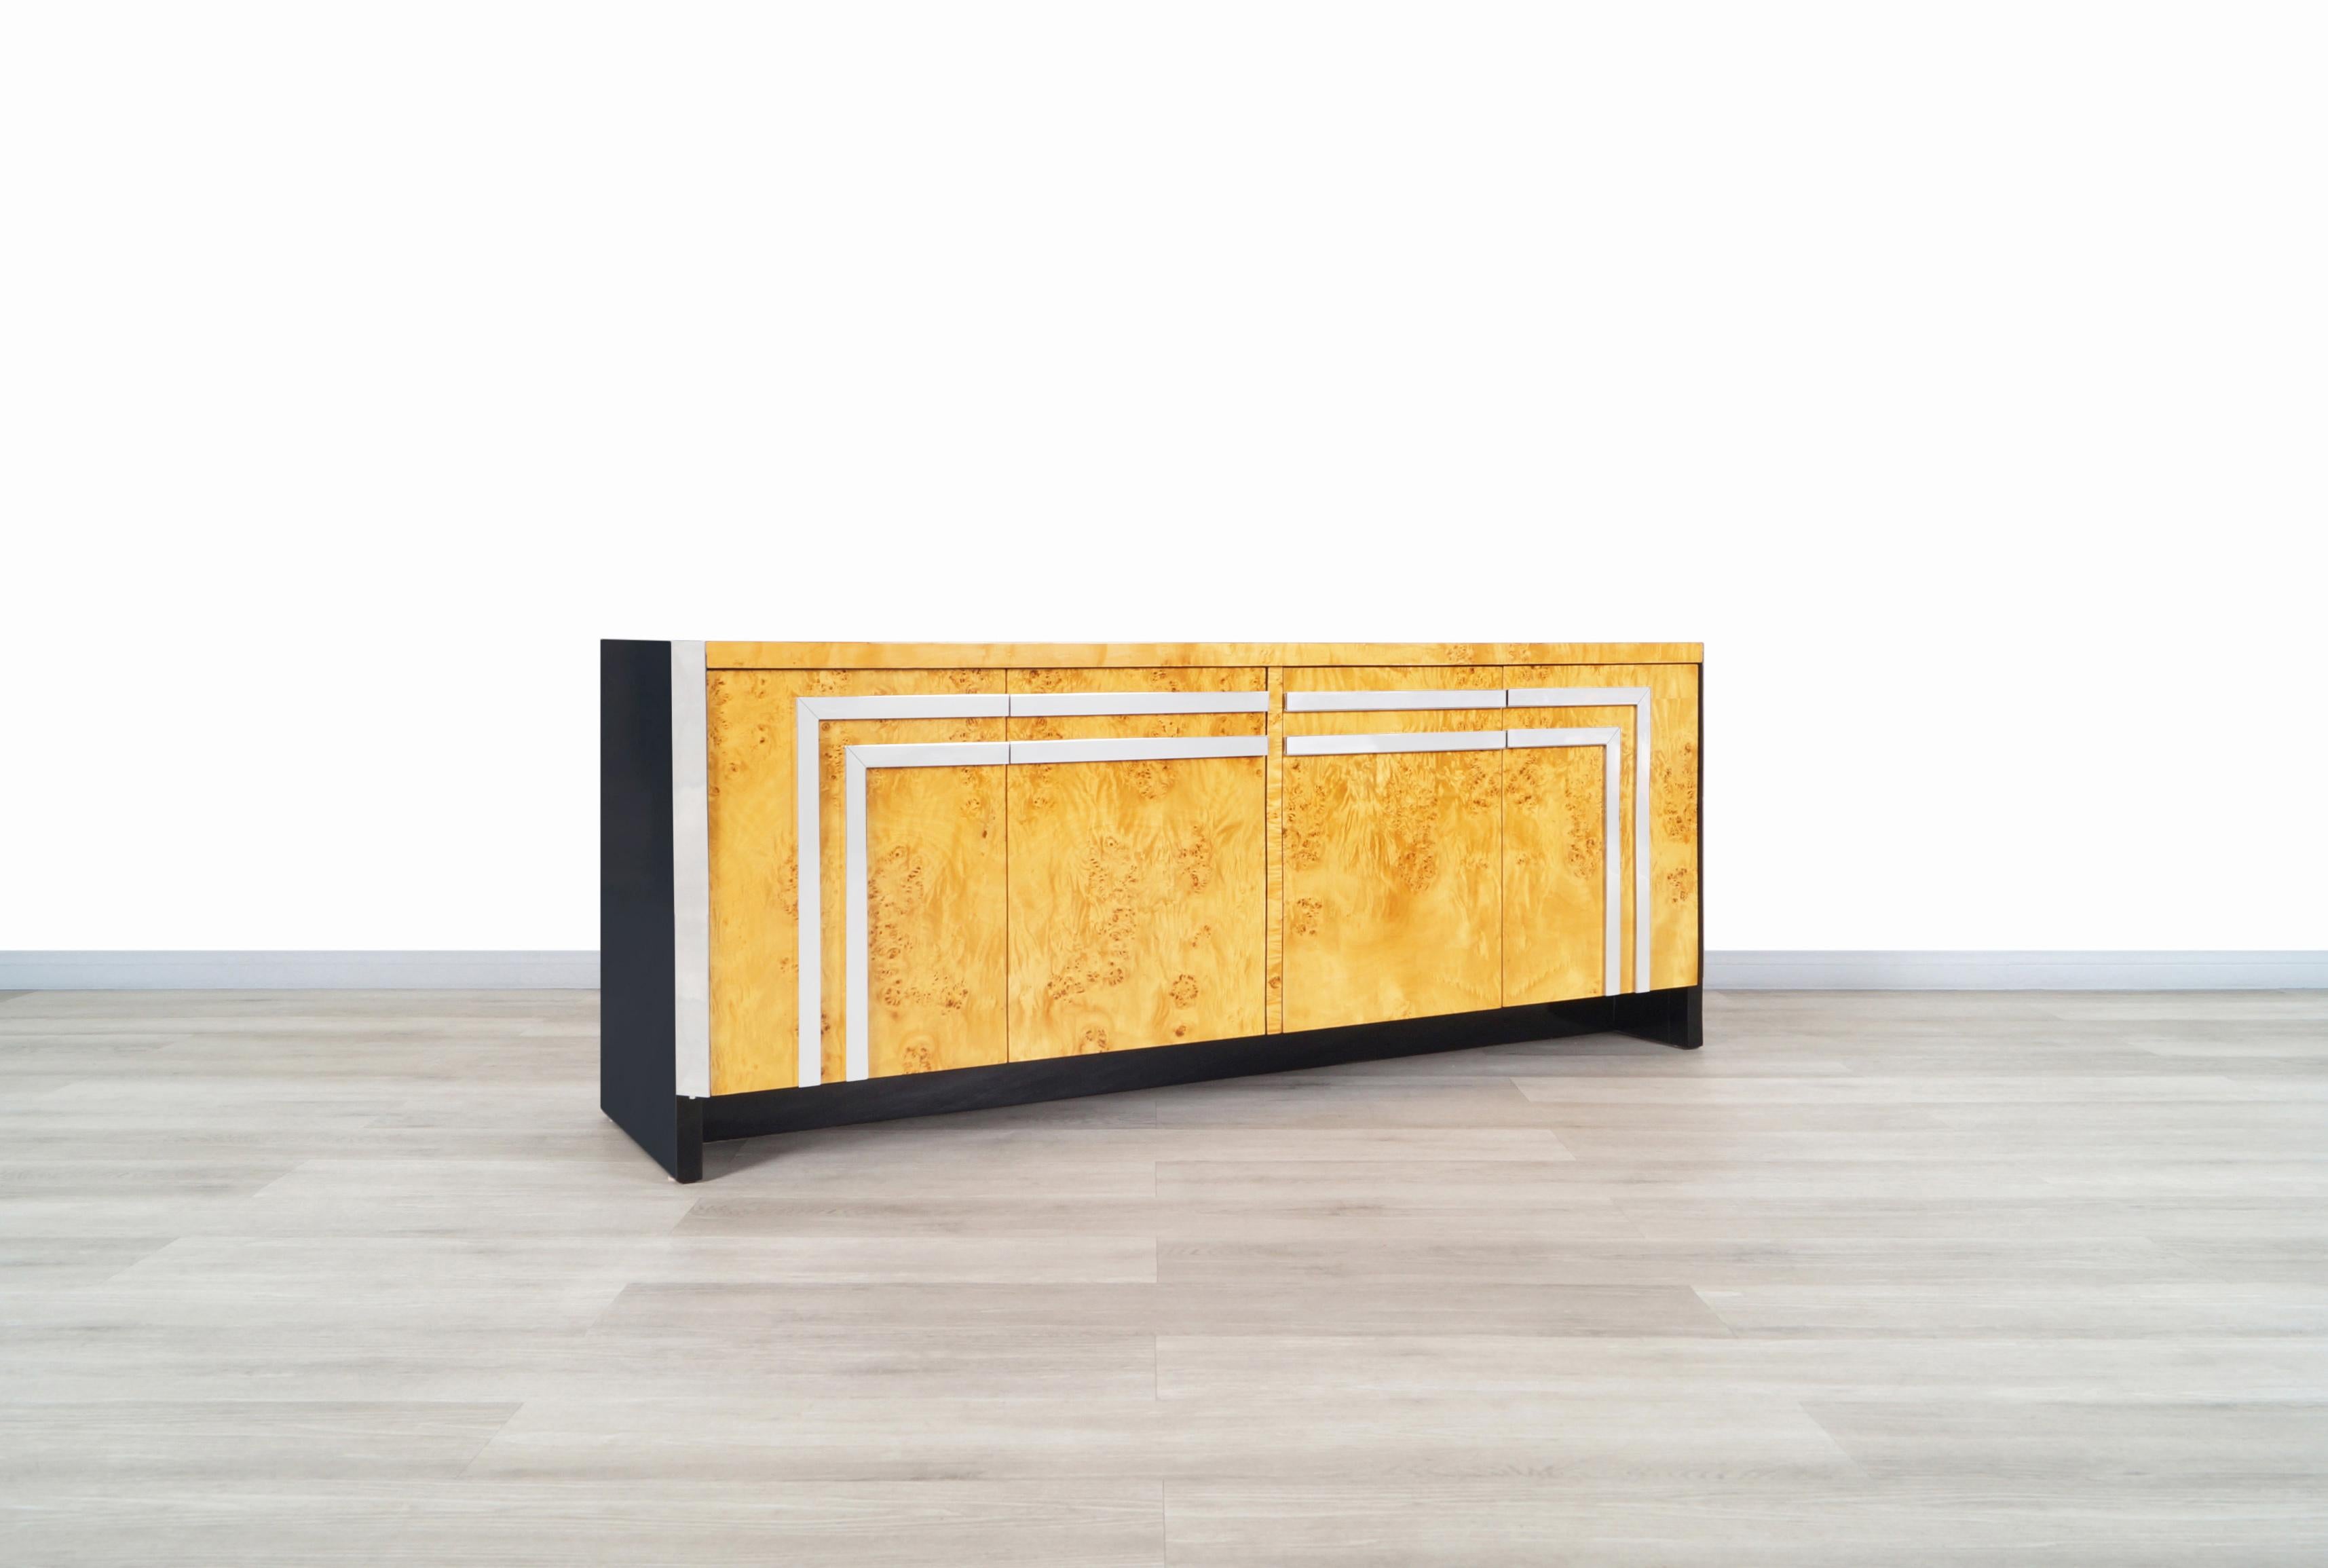 Exceptional vintage Art Deco style burl wood credenza designed by Leon Rosen for Pace Collection in Italy, circa 1970s. This credenza has a minimalist design that is complemented by its elegant high-quality materials that makes it a glamorous piece